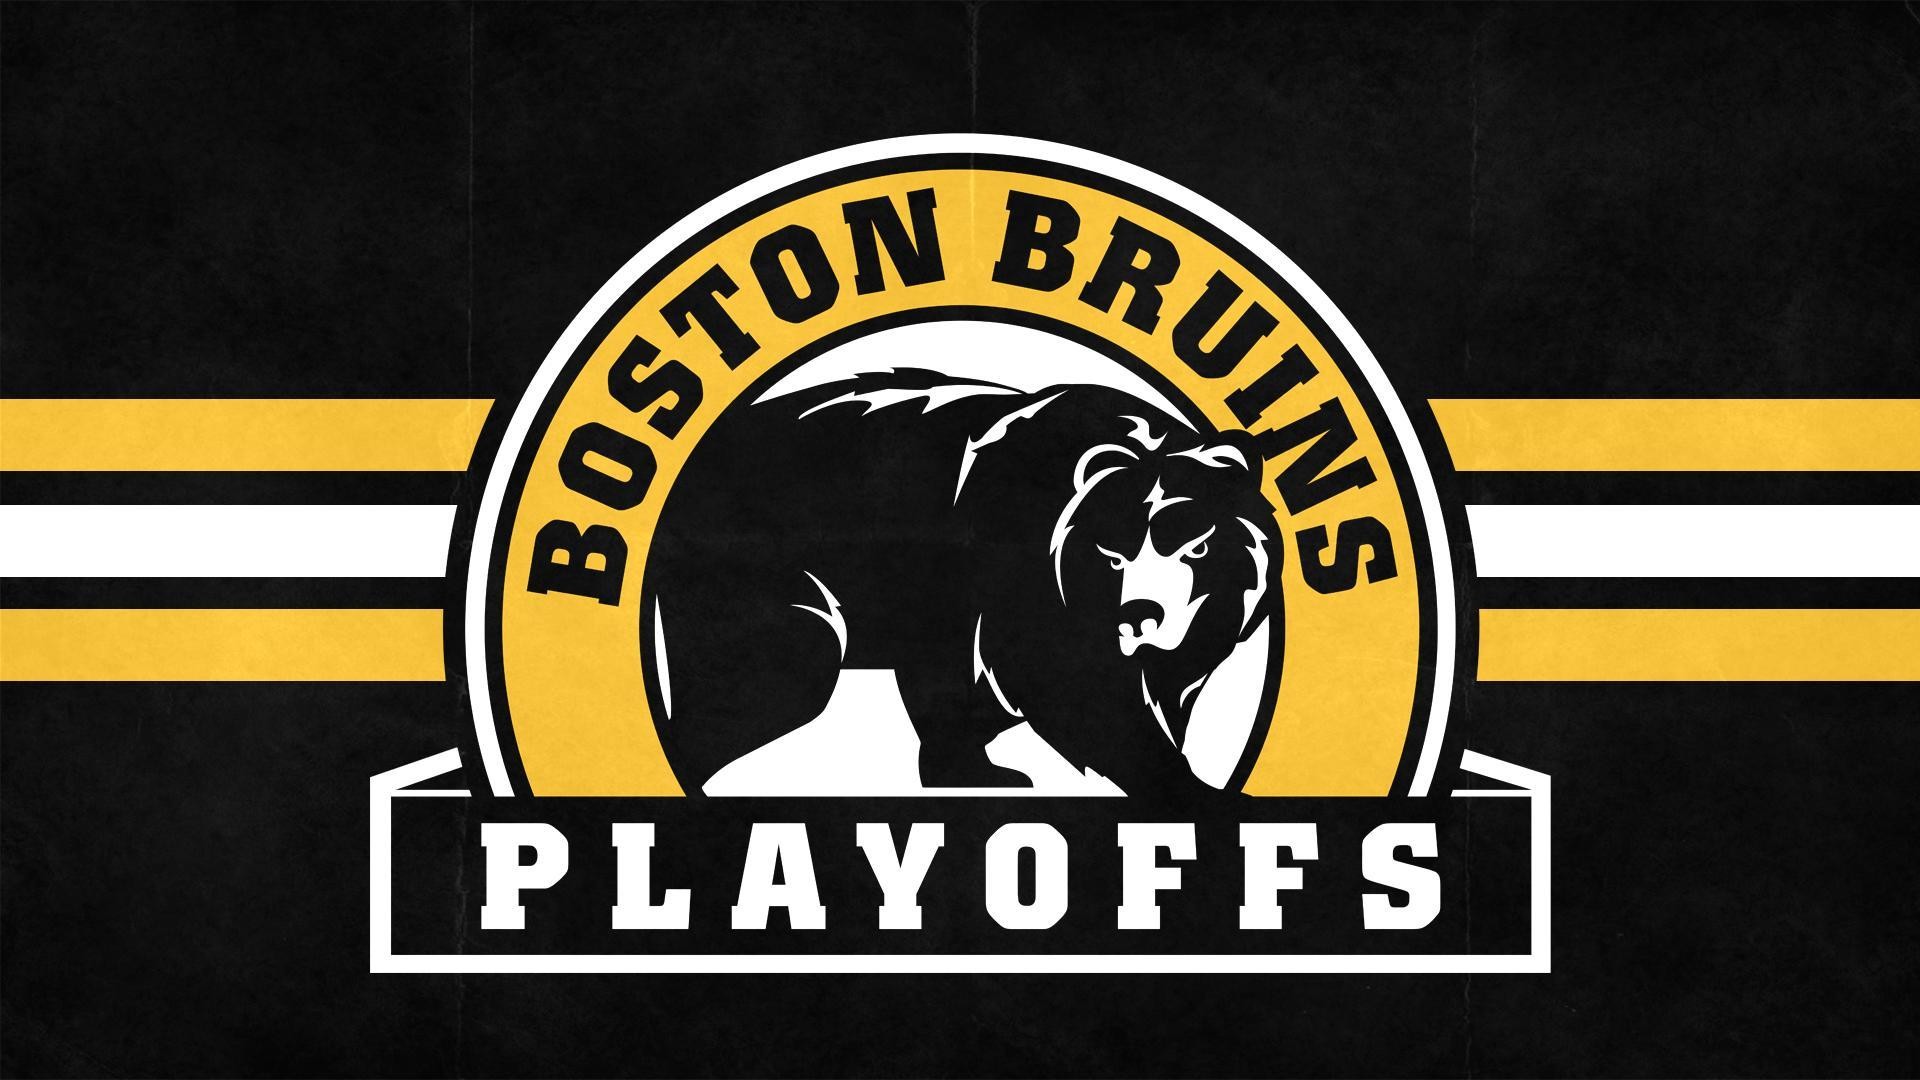 1920x1080 Boston Bruins wallpapers | Boston Bruins background - Page 6